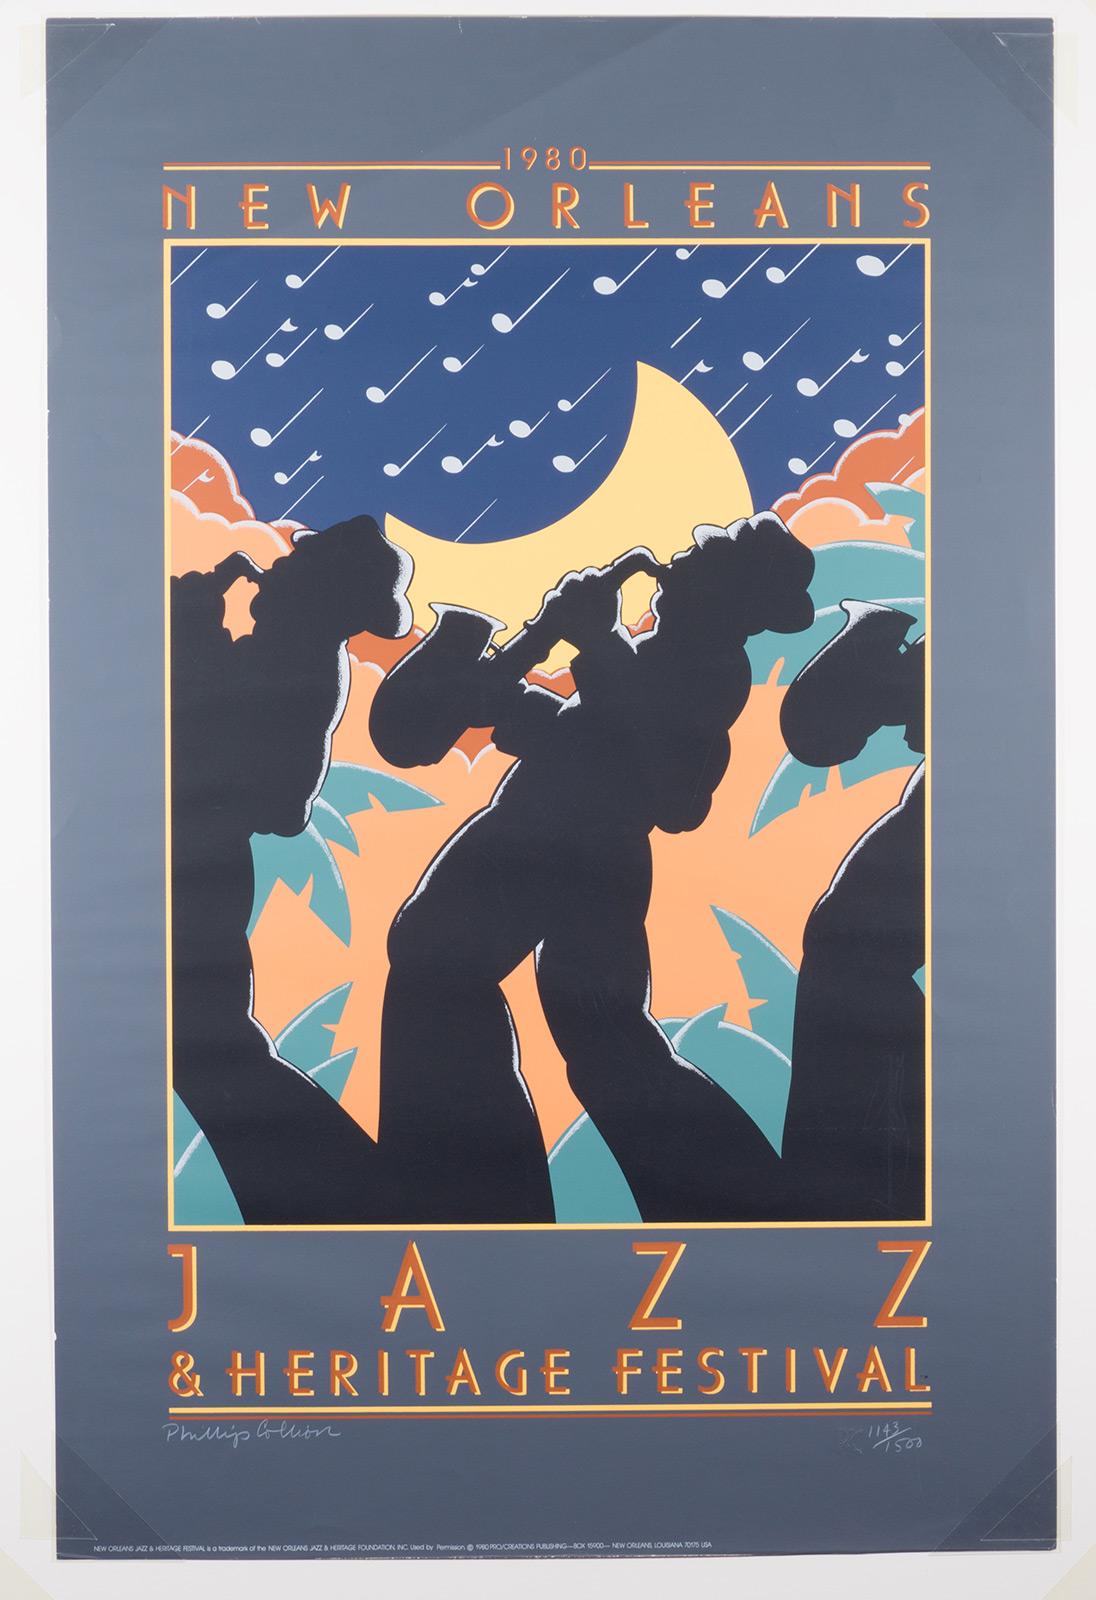 Phillip Collier Print - New Orleans Jazz and Heritage Festival Poster - 1980